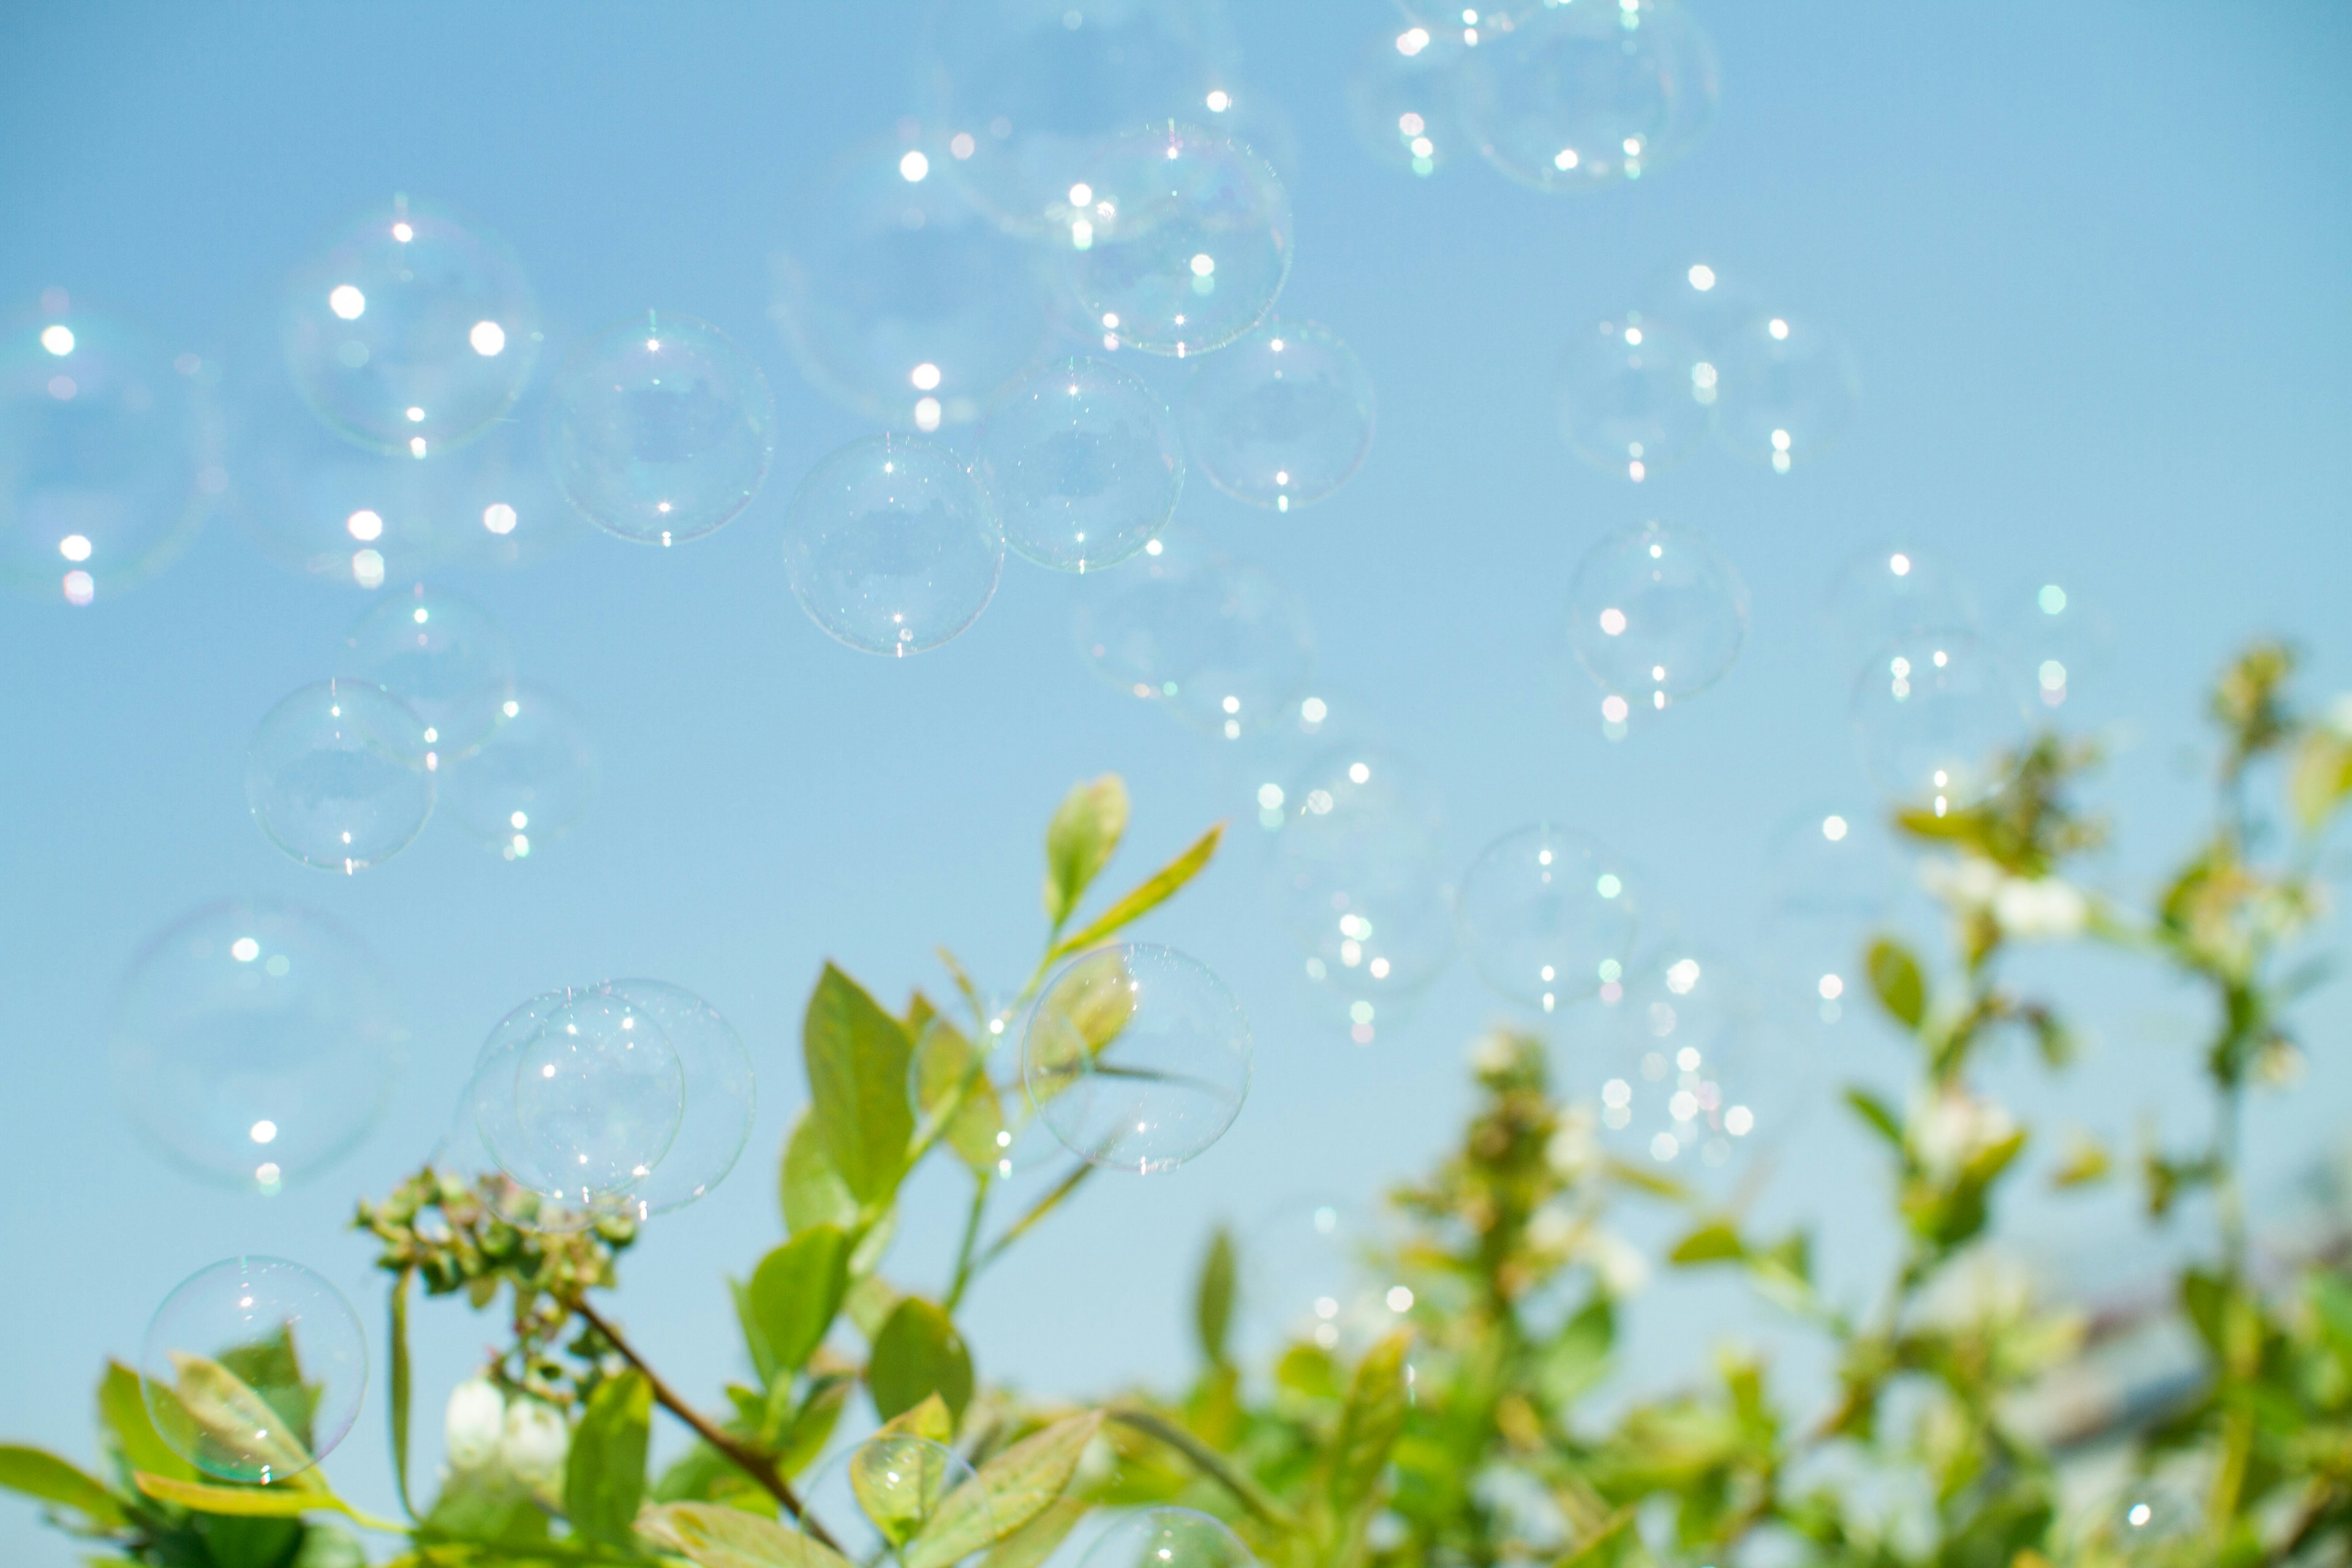 bubbles floating over plants